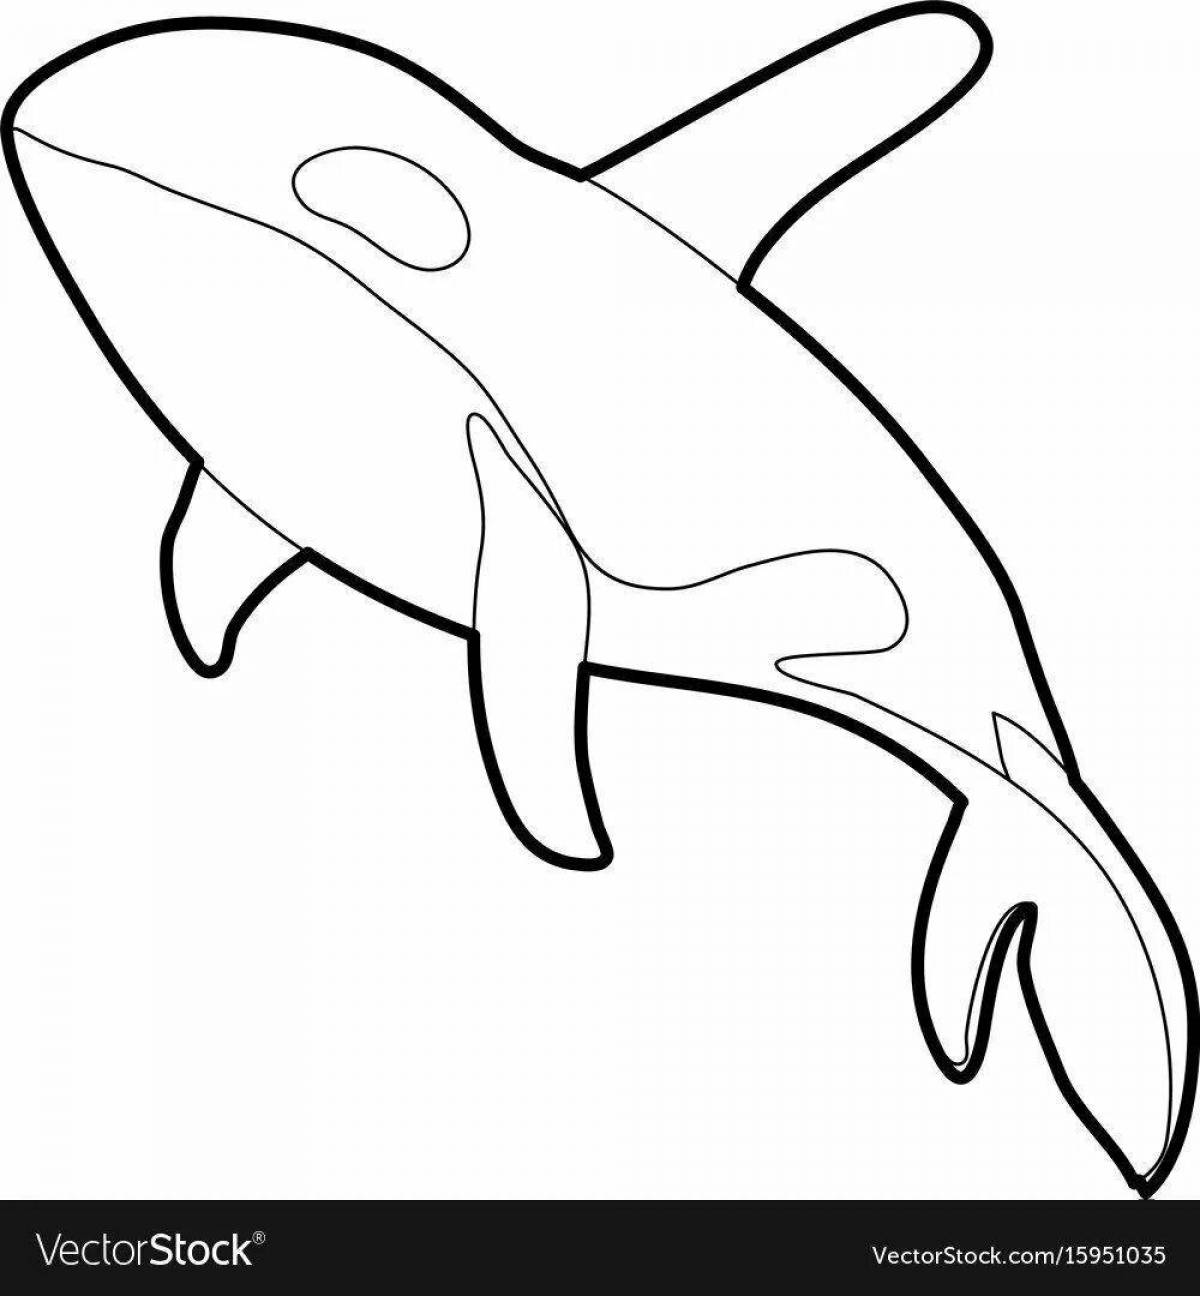 Vibrant killer whale coloring page